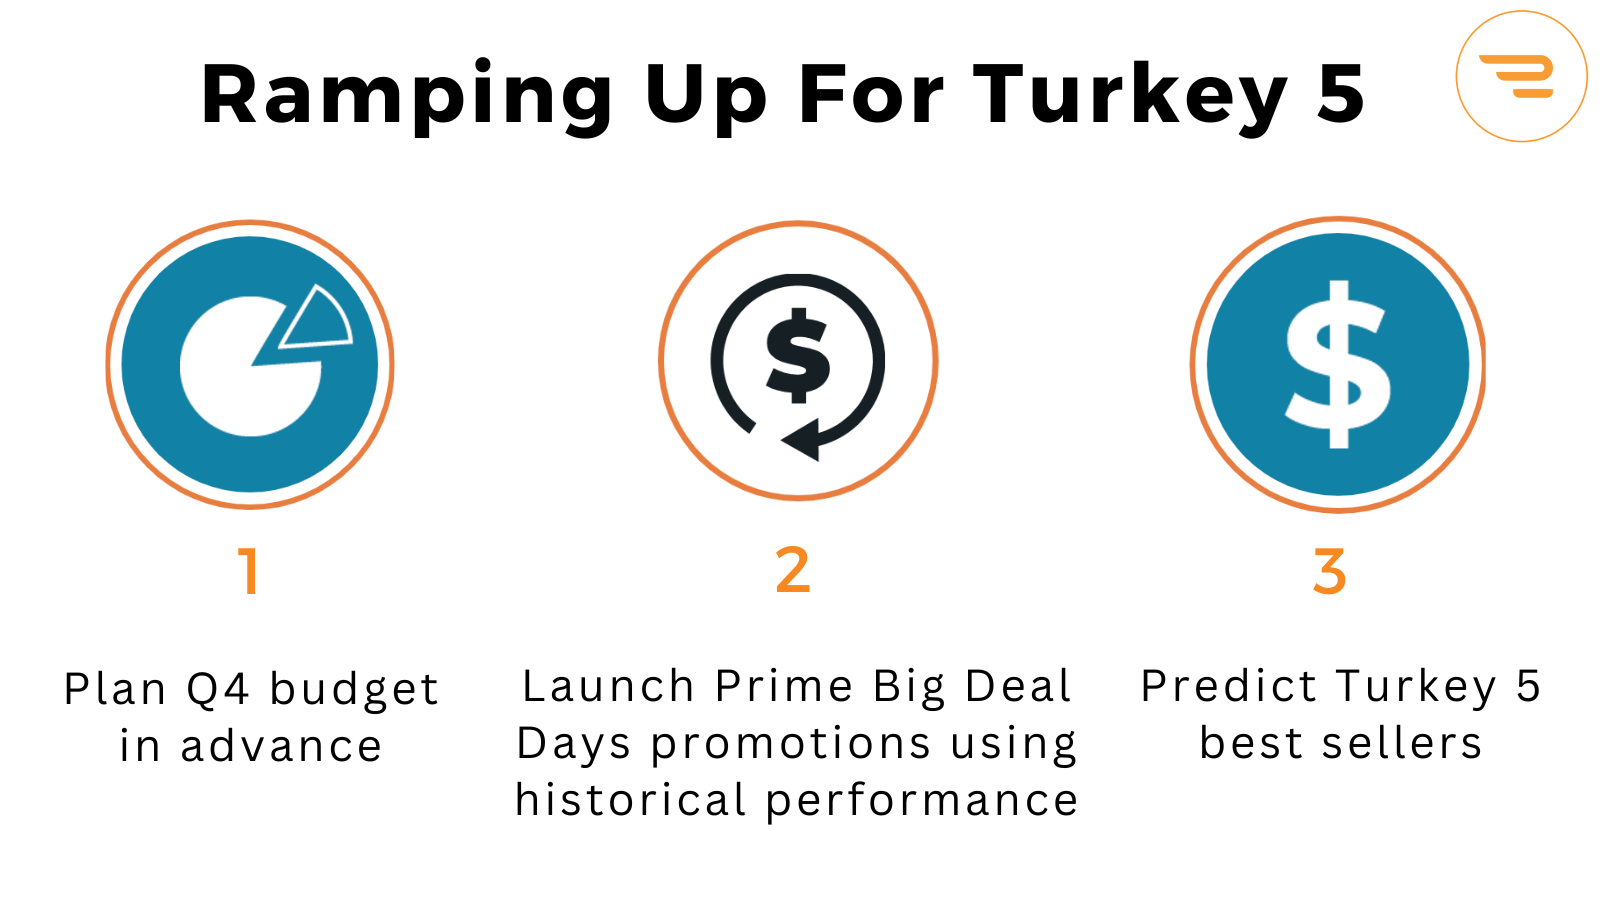 Graphic showing 3 steps to ramp up for Turkey 5: planning Q4 budget, launching promotions, and predicting best sellers.